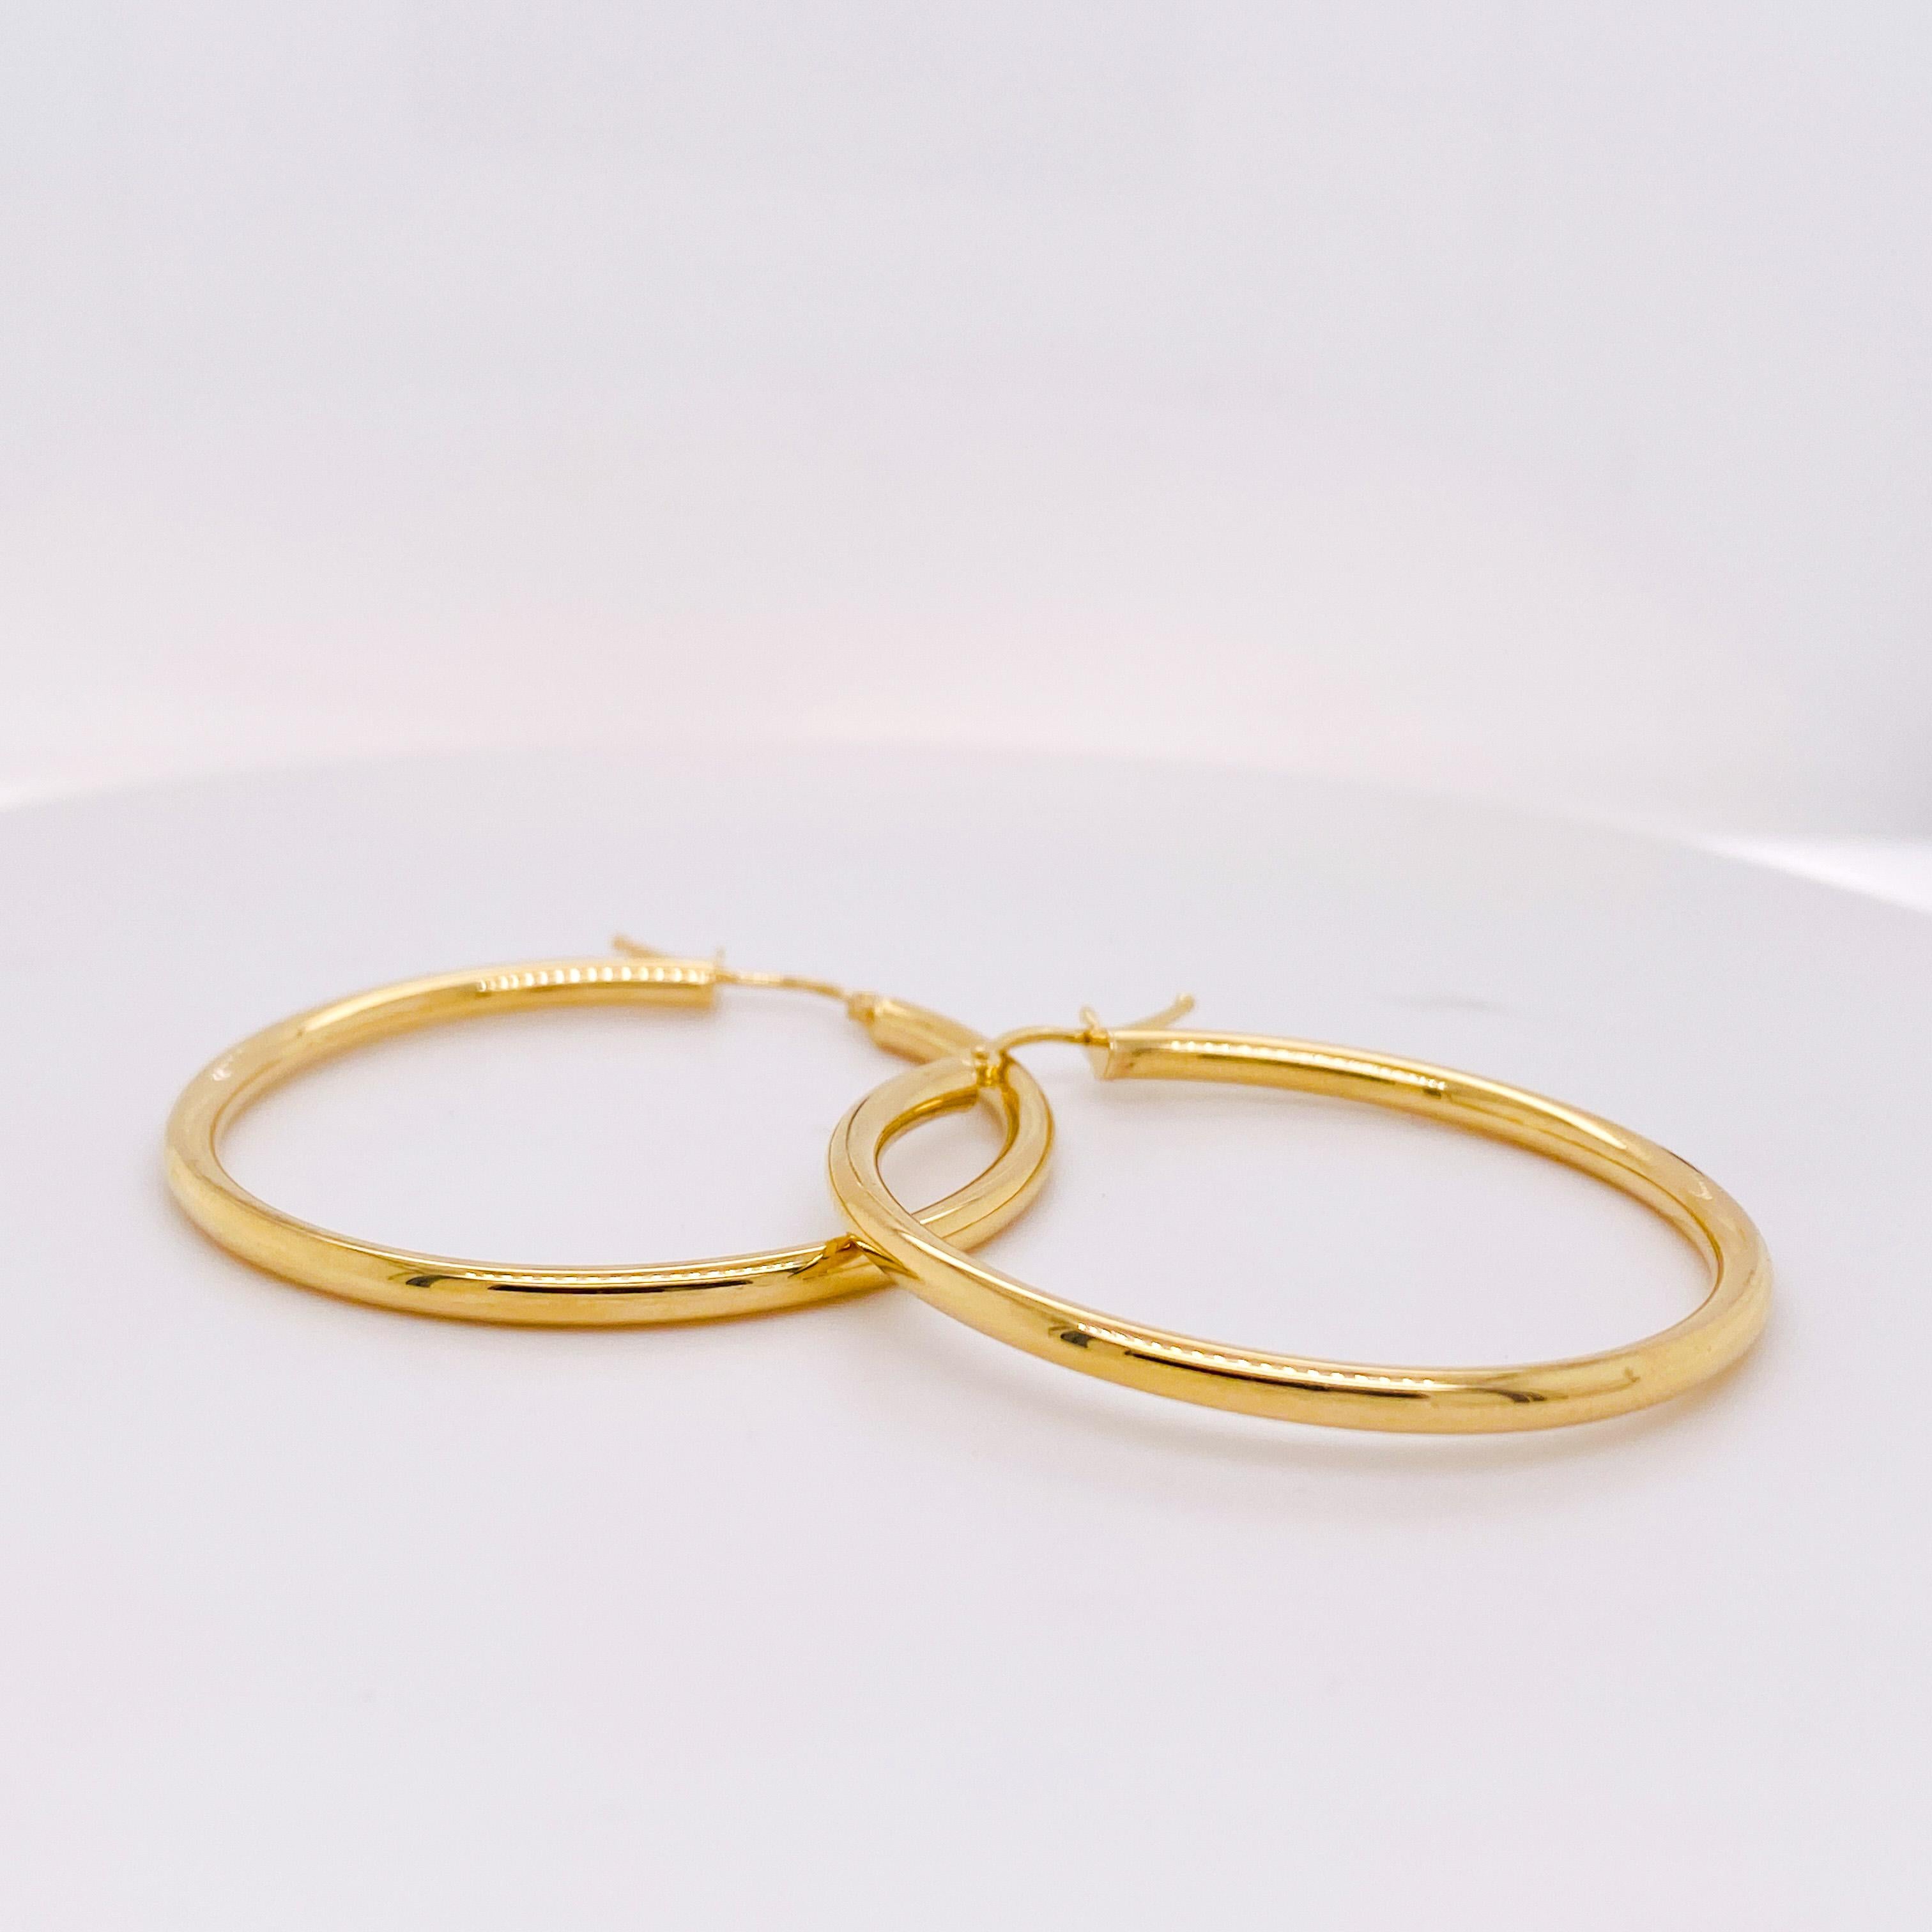 This 1.5 inch gold hoop is the latest fabulous hoop earring you need! These 2 mm wide hoop earrings are lightweight and easy to wear so it does not pull on your earlobes... And they're perfect for any hair length! Yellow gold color is what all the